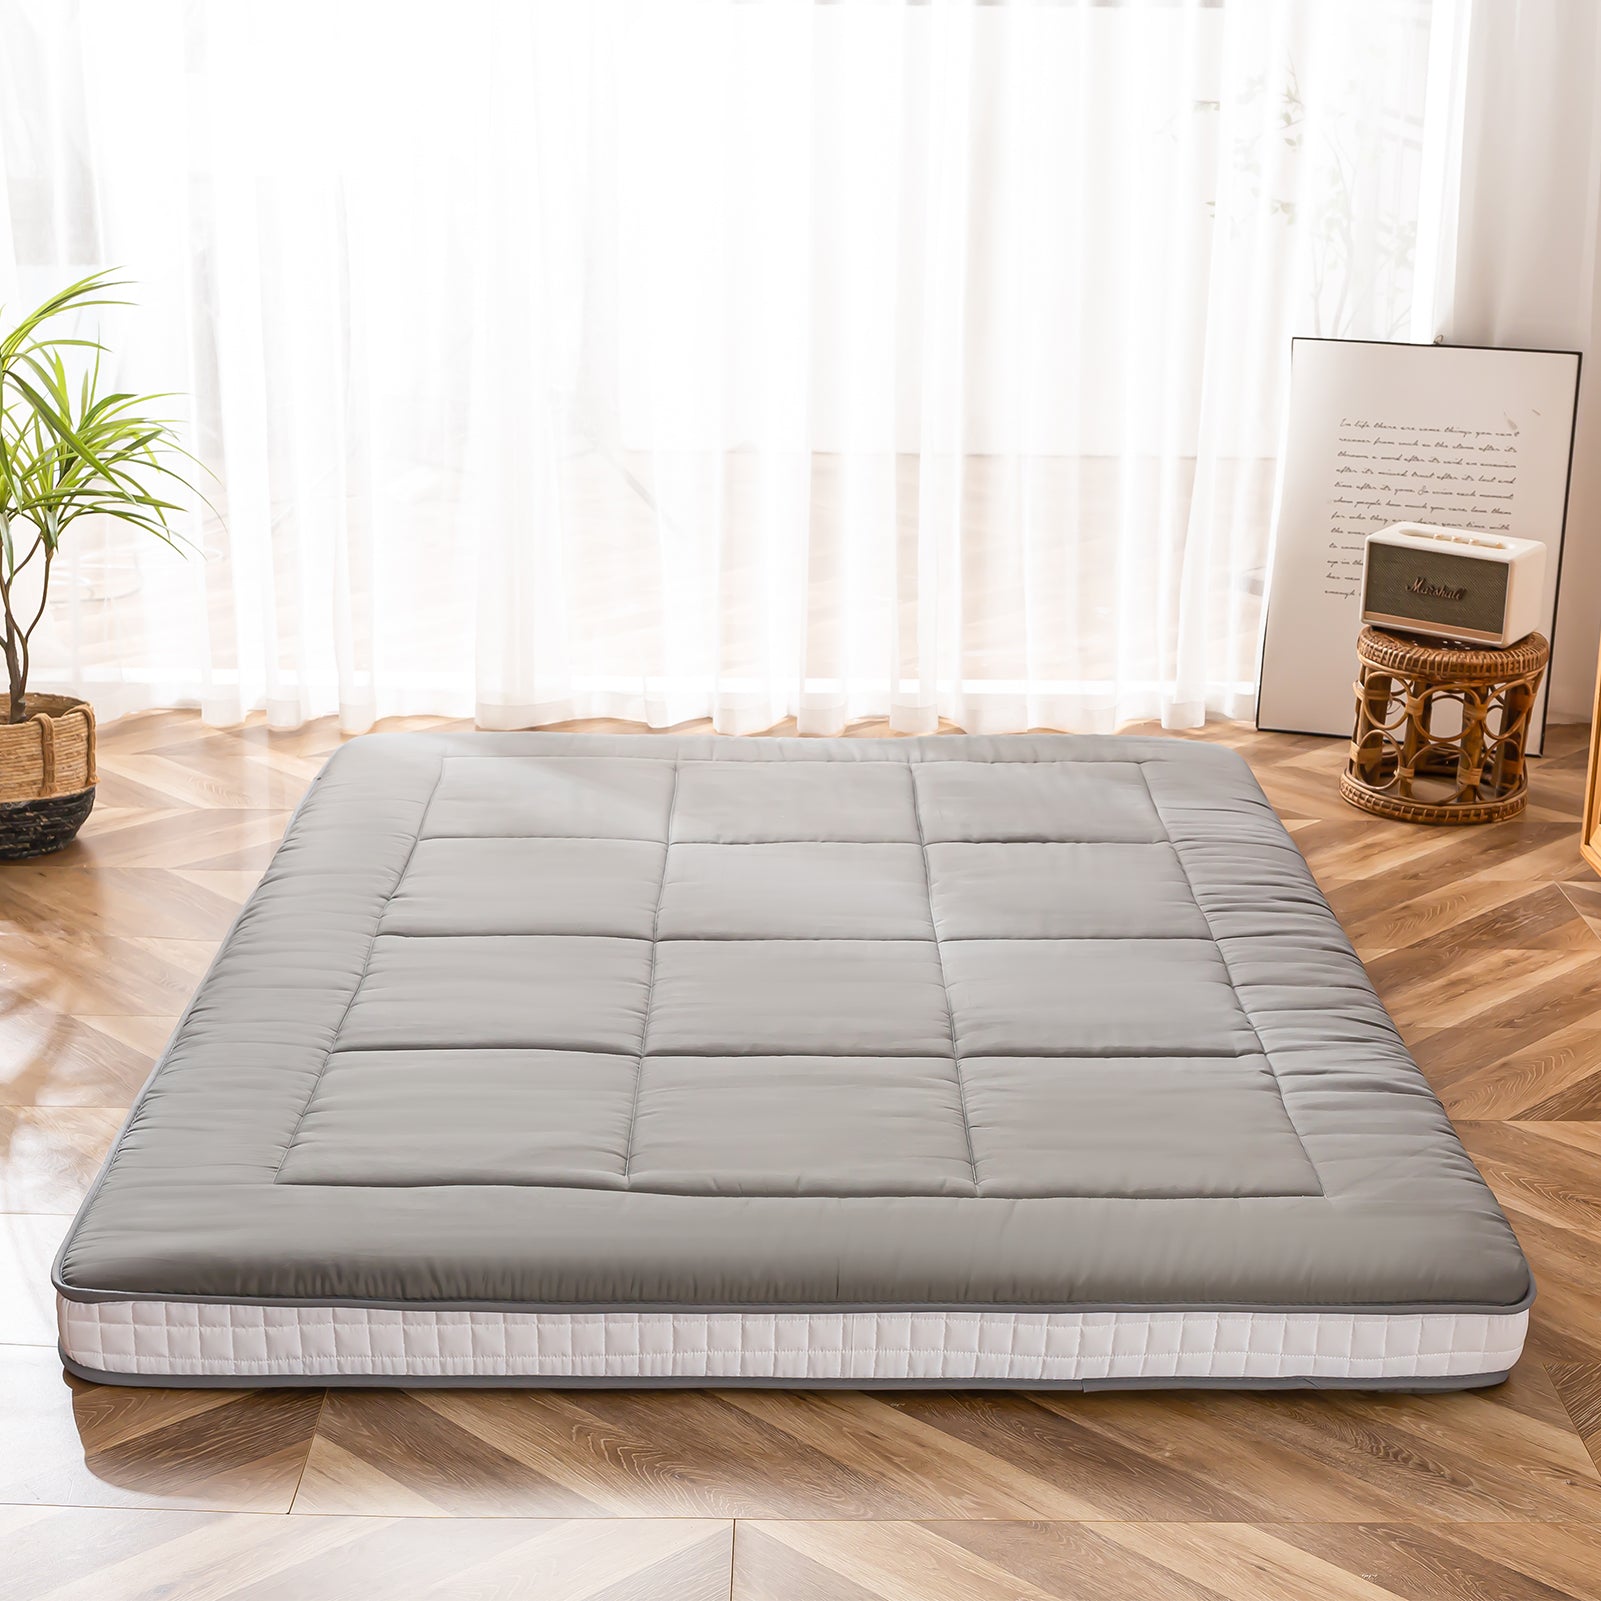 Futon Mattress, Padded Japanese Floor Mattress Quilted Bed Mattress Topper,  Extra Thick Folding Sleeping Pad, Grey, Twin 